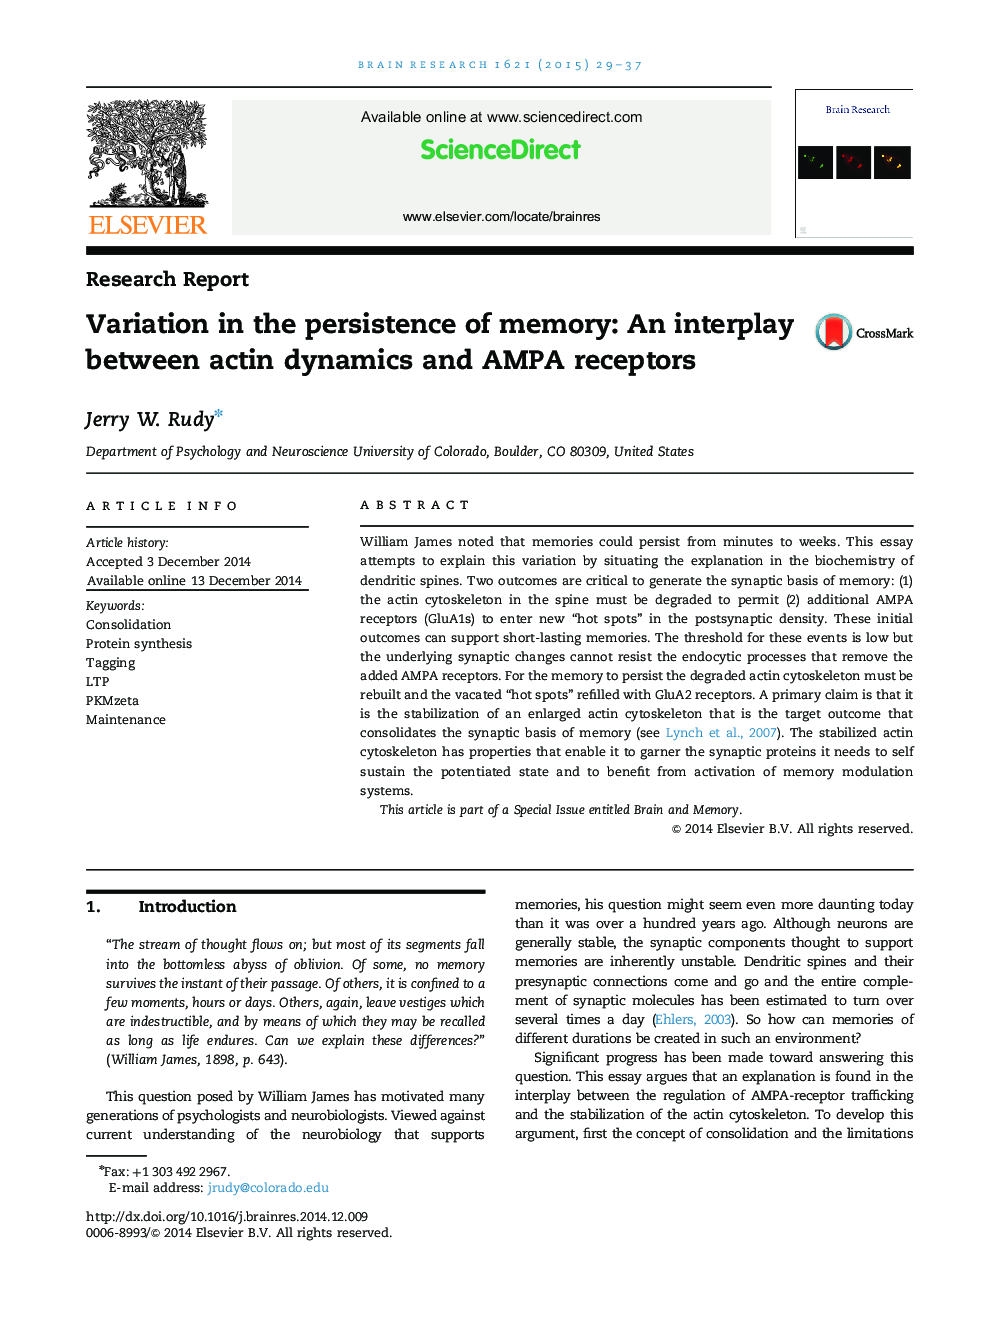 Research ReportVariation in the persistence of memory: An interplay between actin dynamics and AMPA receptors